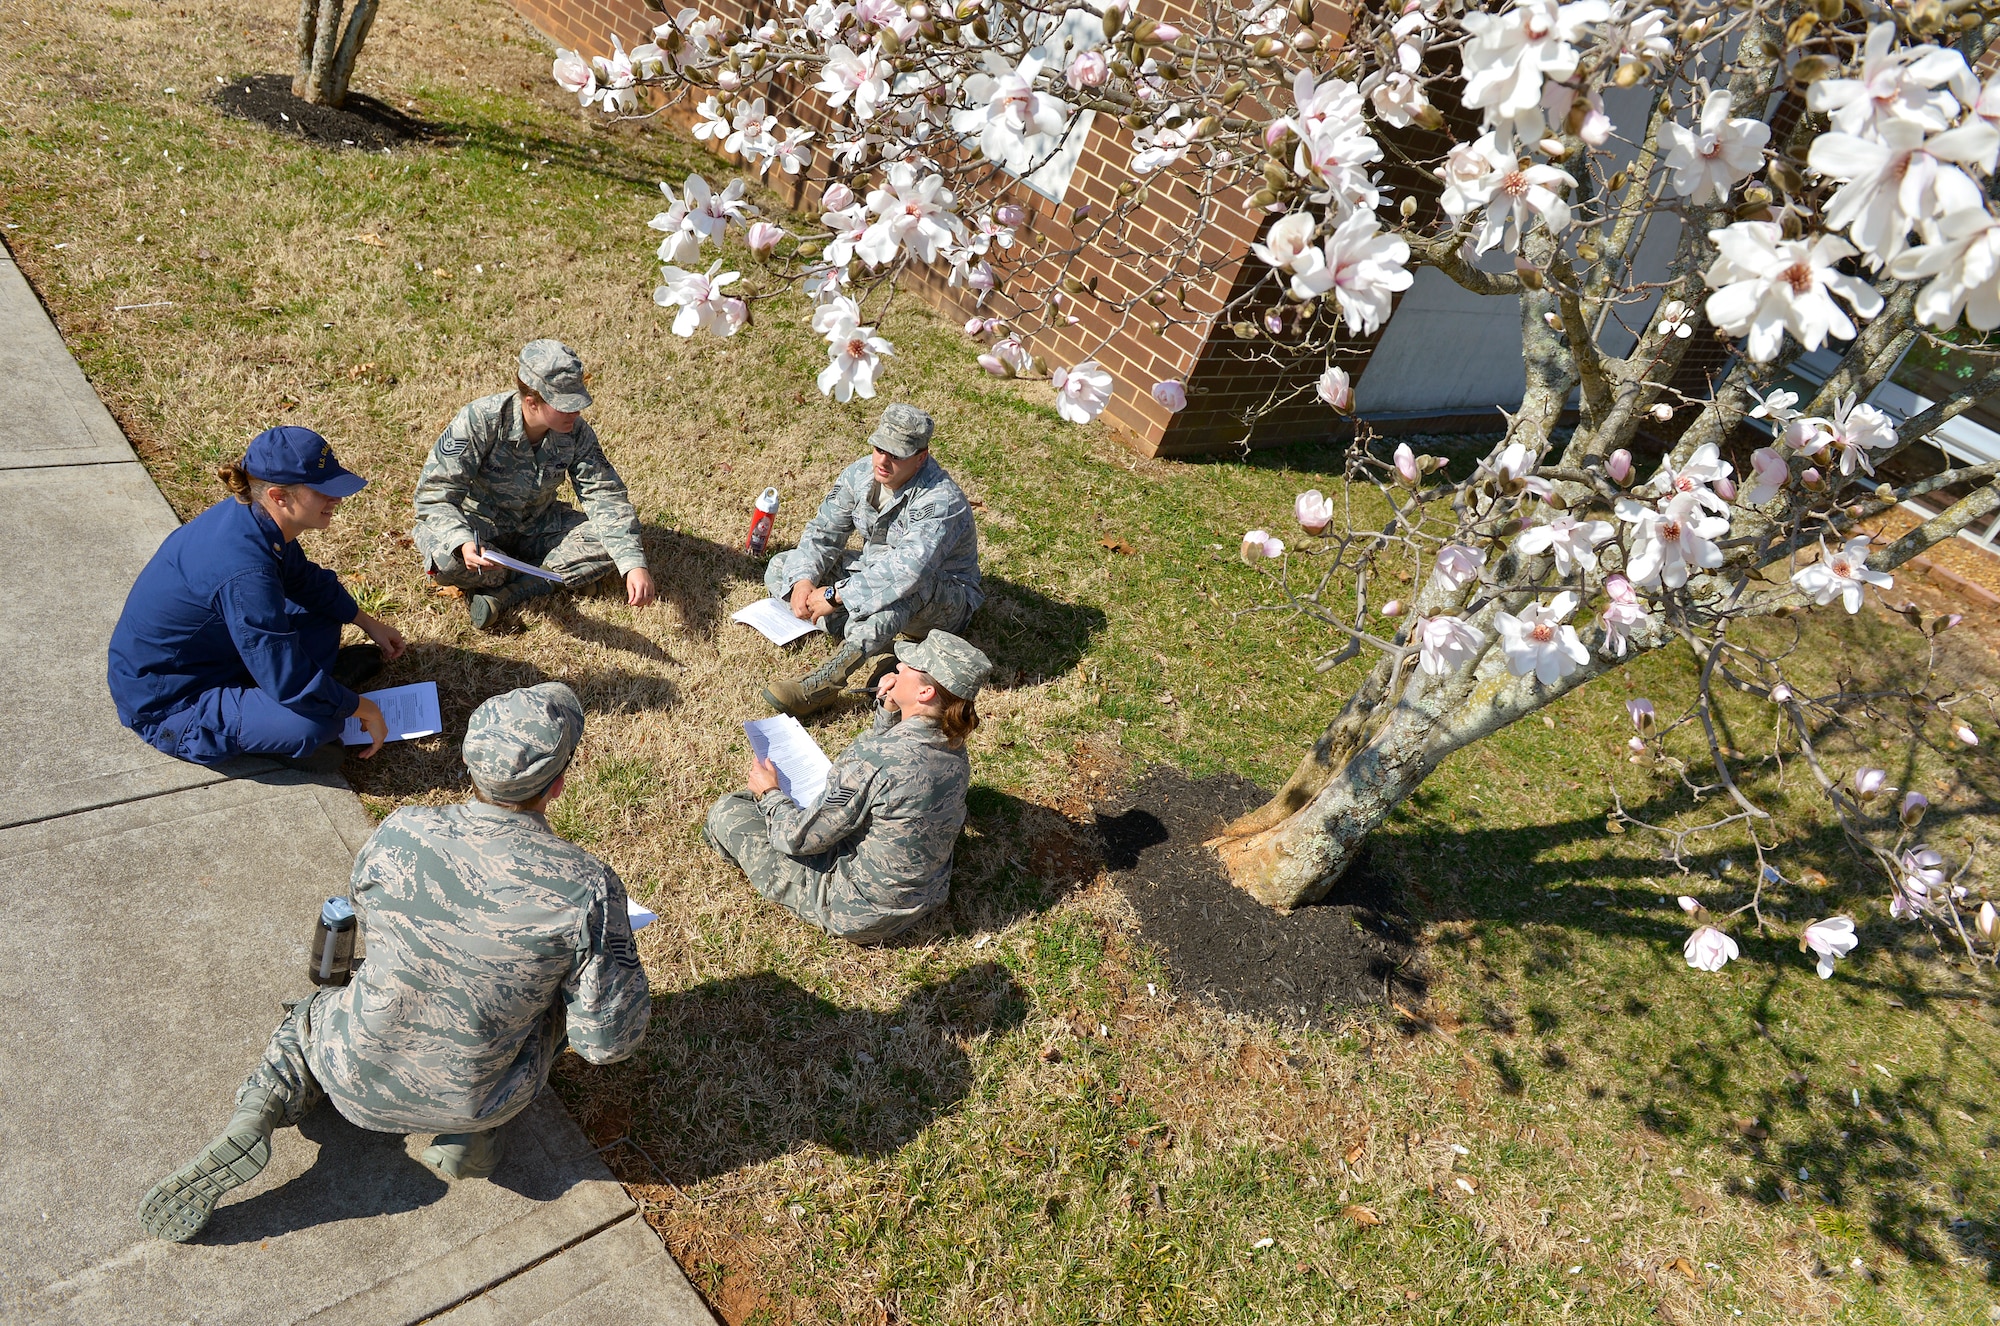 MCGHEE TYSON AIR NATIONAL GUARD BASE, Tenn. - U.S. Air Force Noncommissioned Officer Academy students study under the early season tree blossoms here March 11, 2014 at the I.G. Brown Training and Education Center campus. (U.S. Air National Guard photo by Master Sgt. Kurt Skoglund/Released)